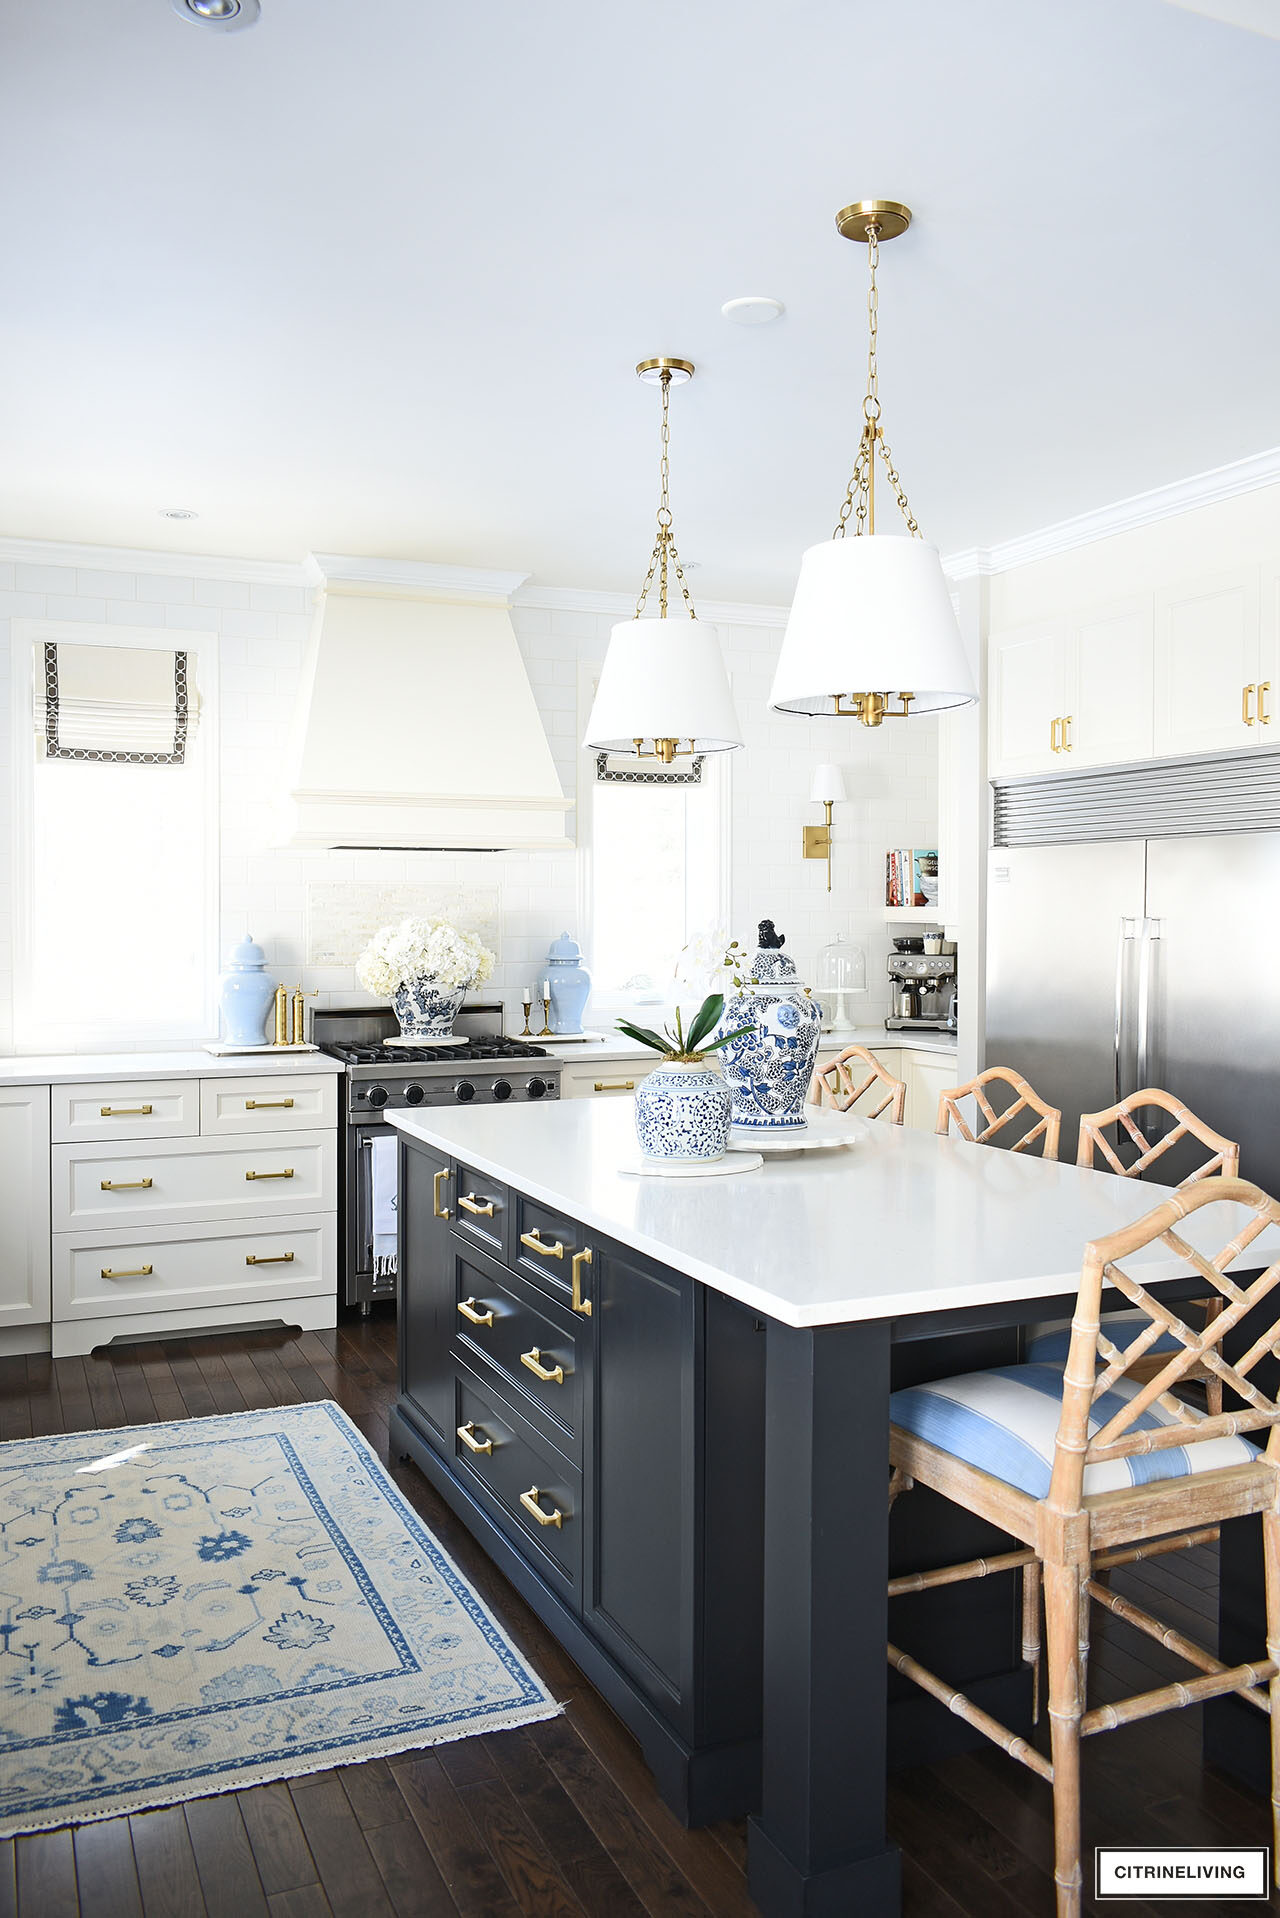 Kitchen styled for spring with blue and white ginger jars, white orchids and hydrangeas.